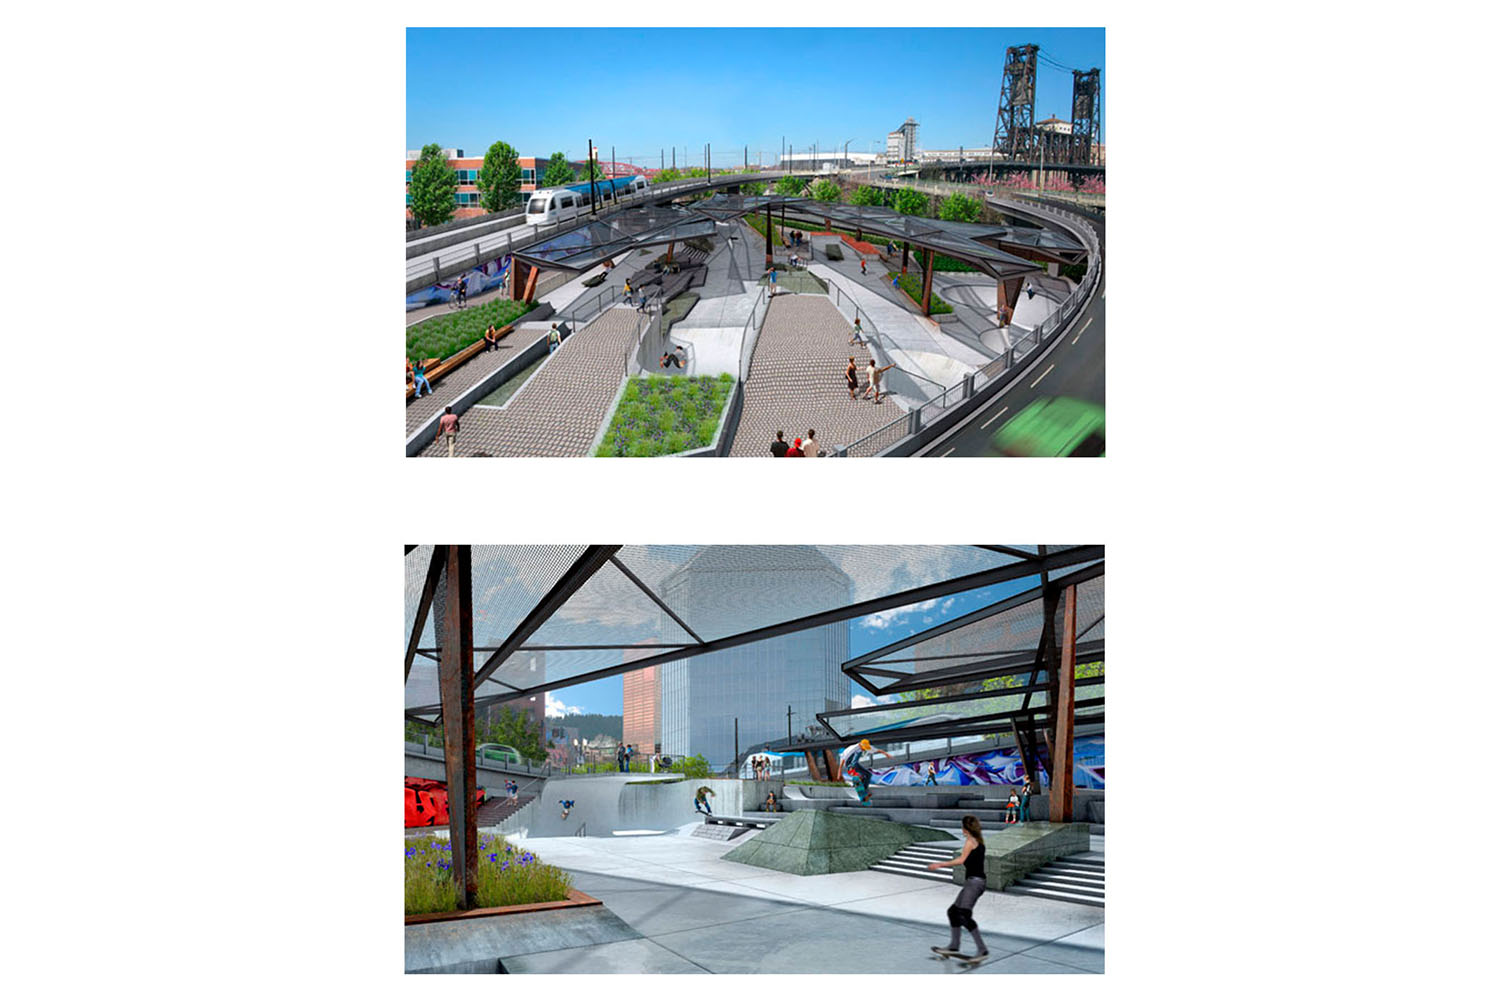  Preliminary renderings showing an overview and a street inspired section of the 30,000 square foot ODOT Steel Bridge Skatepark project. 